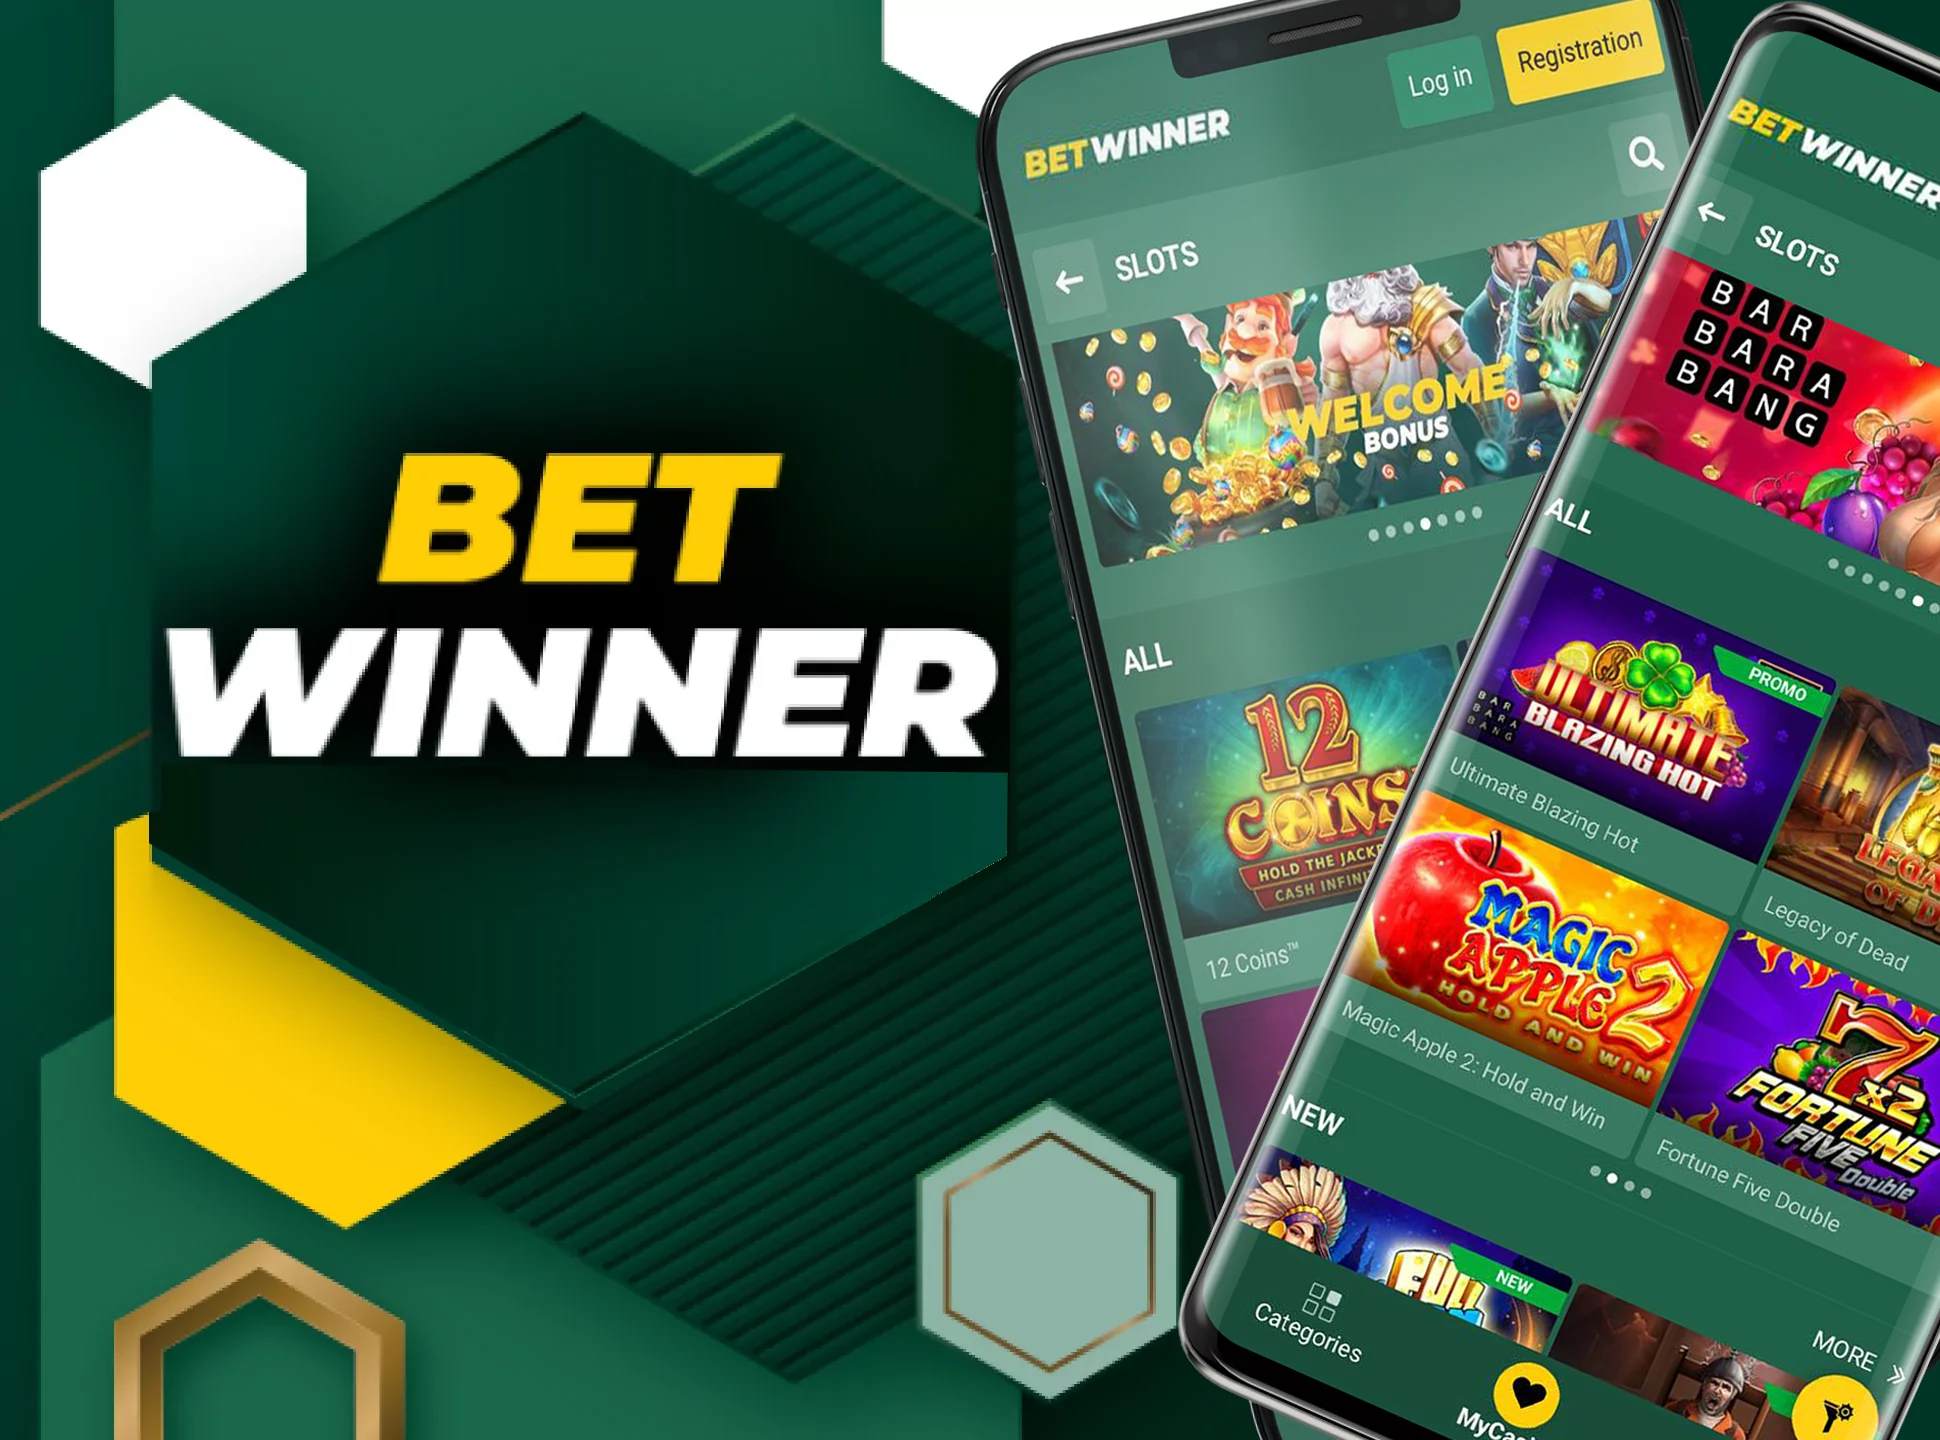 You can download and install the Betwinner app on your smartphone.